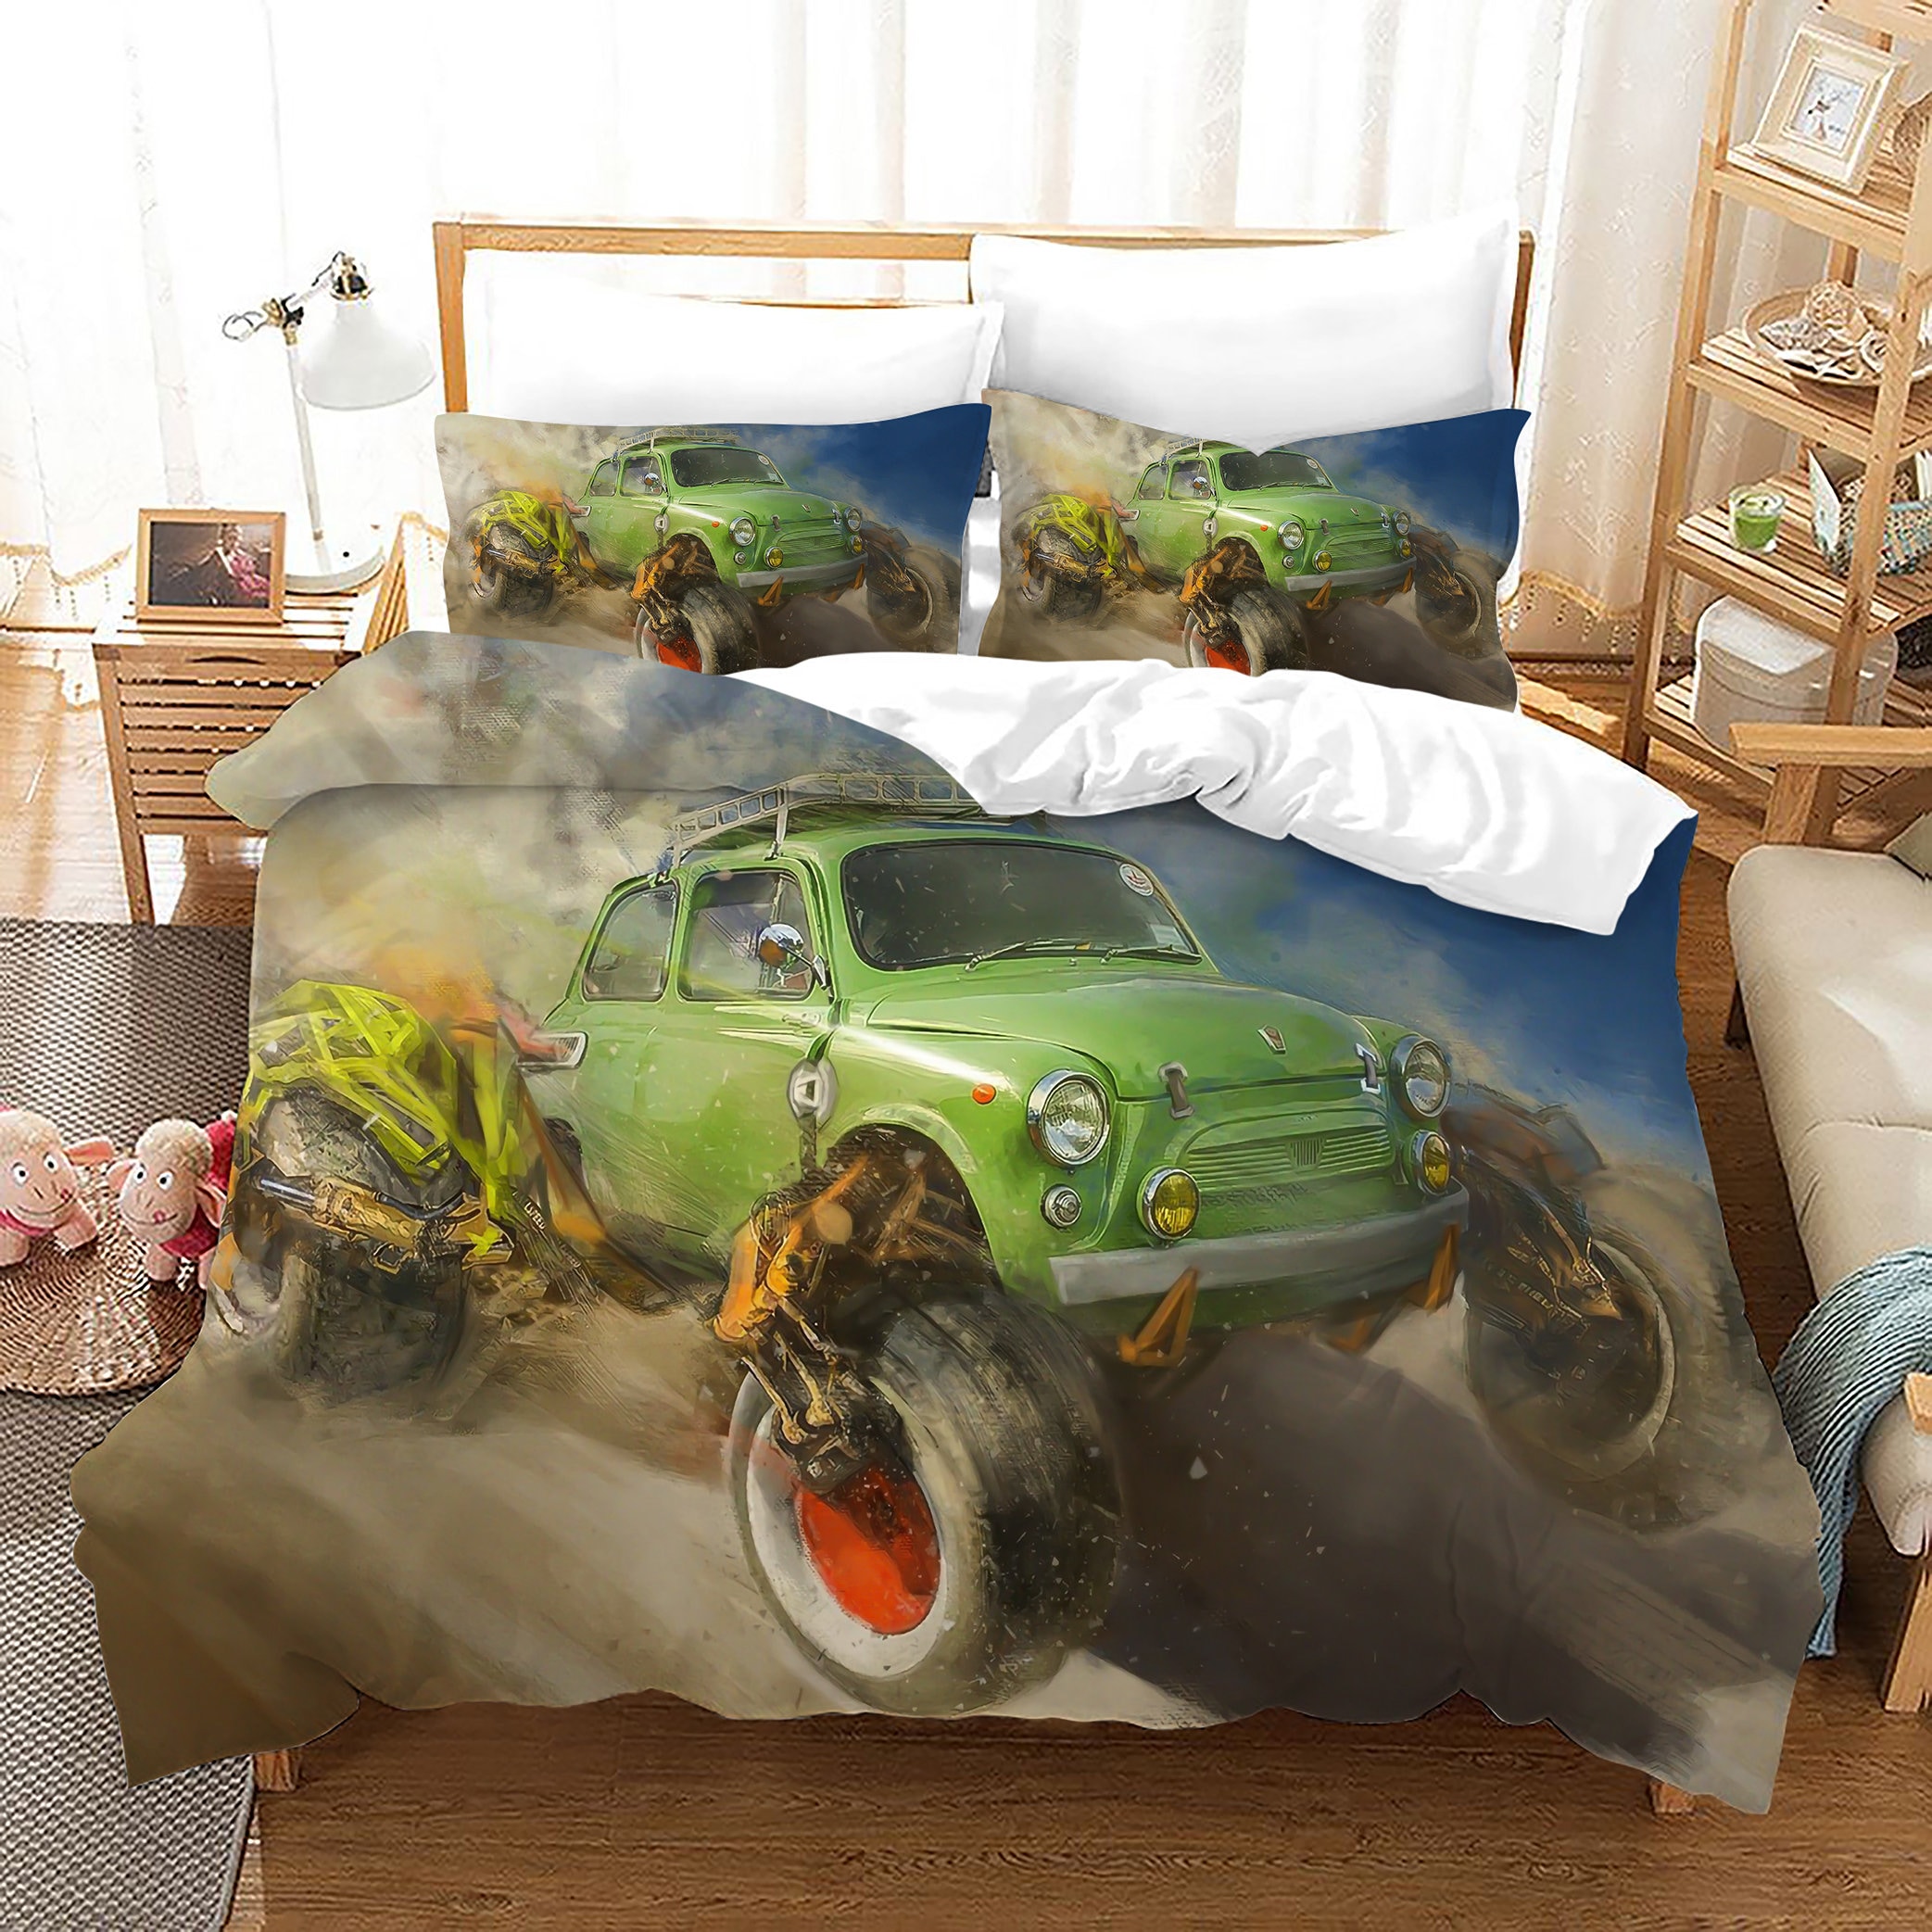 TRUCKS AND TRANSPORT DOUBLE DUVET COVER SET TRACTORS CARS NEW REVERSIBLE 